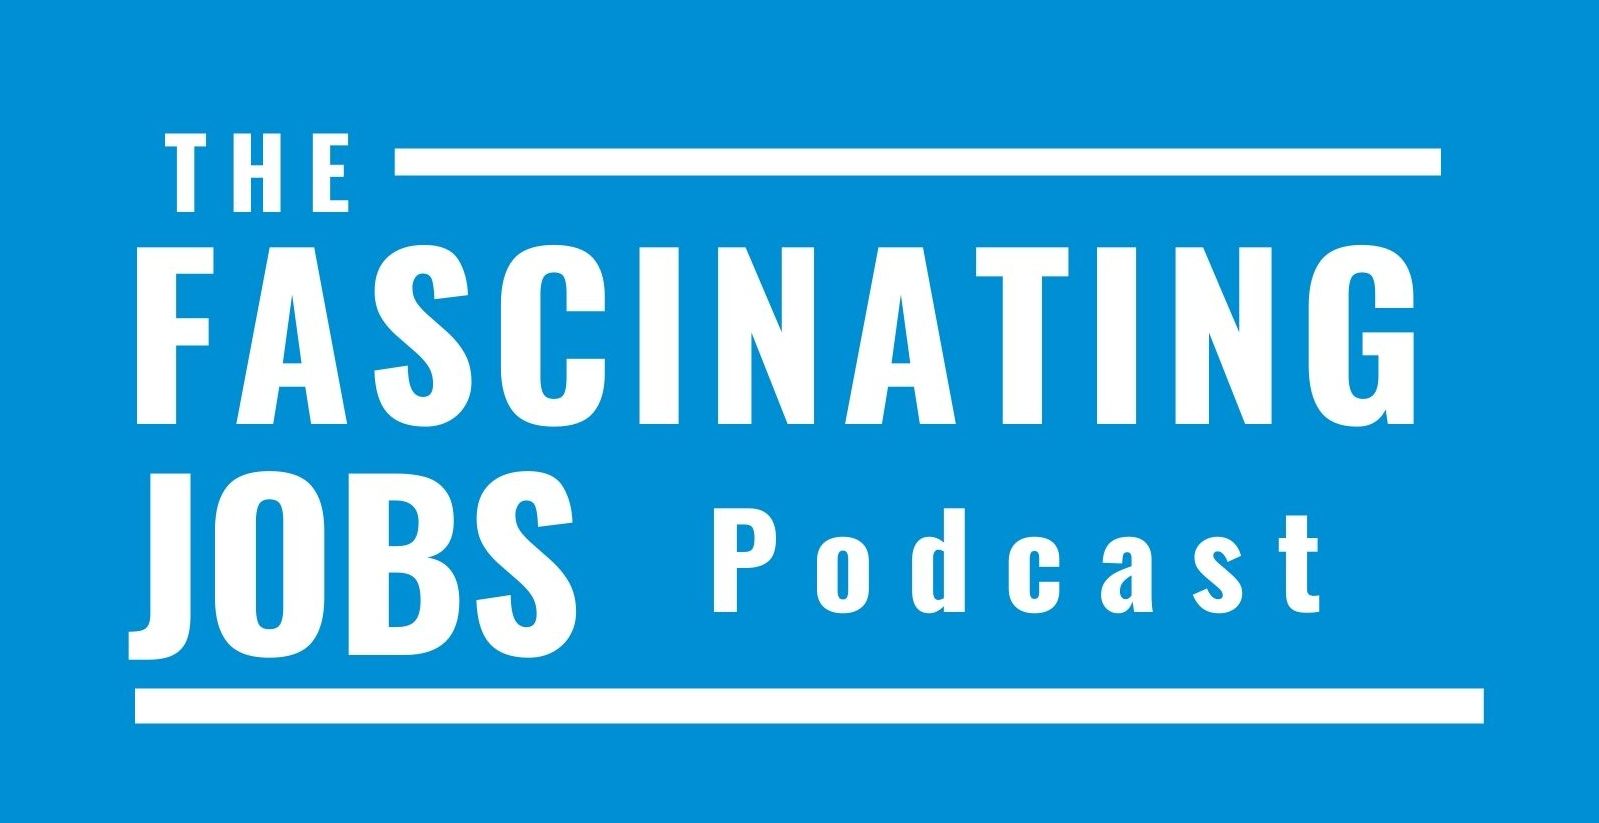 The Fascinating Jobs Podcast